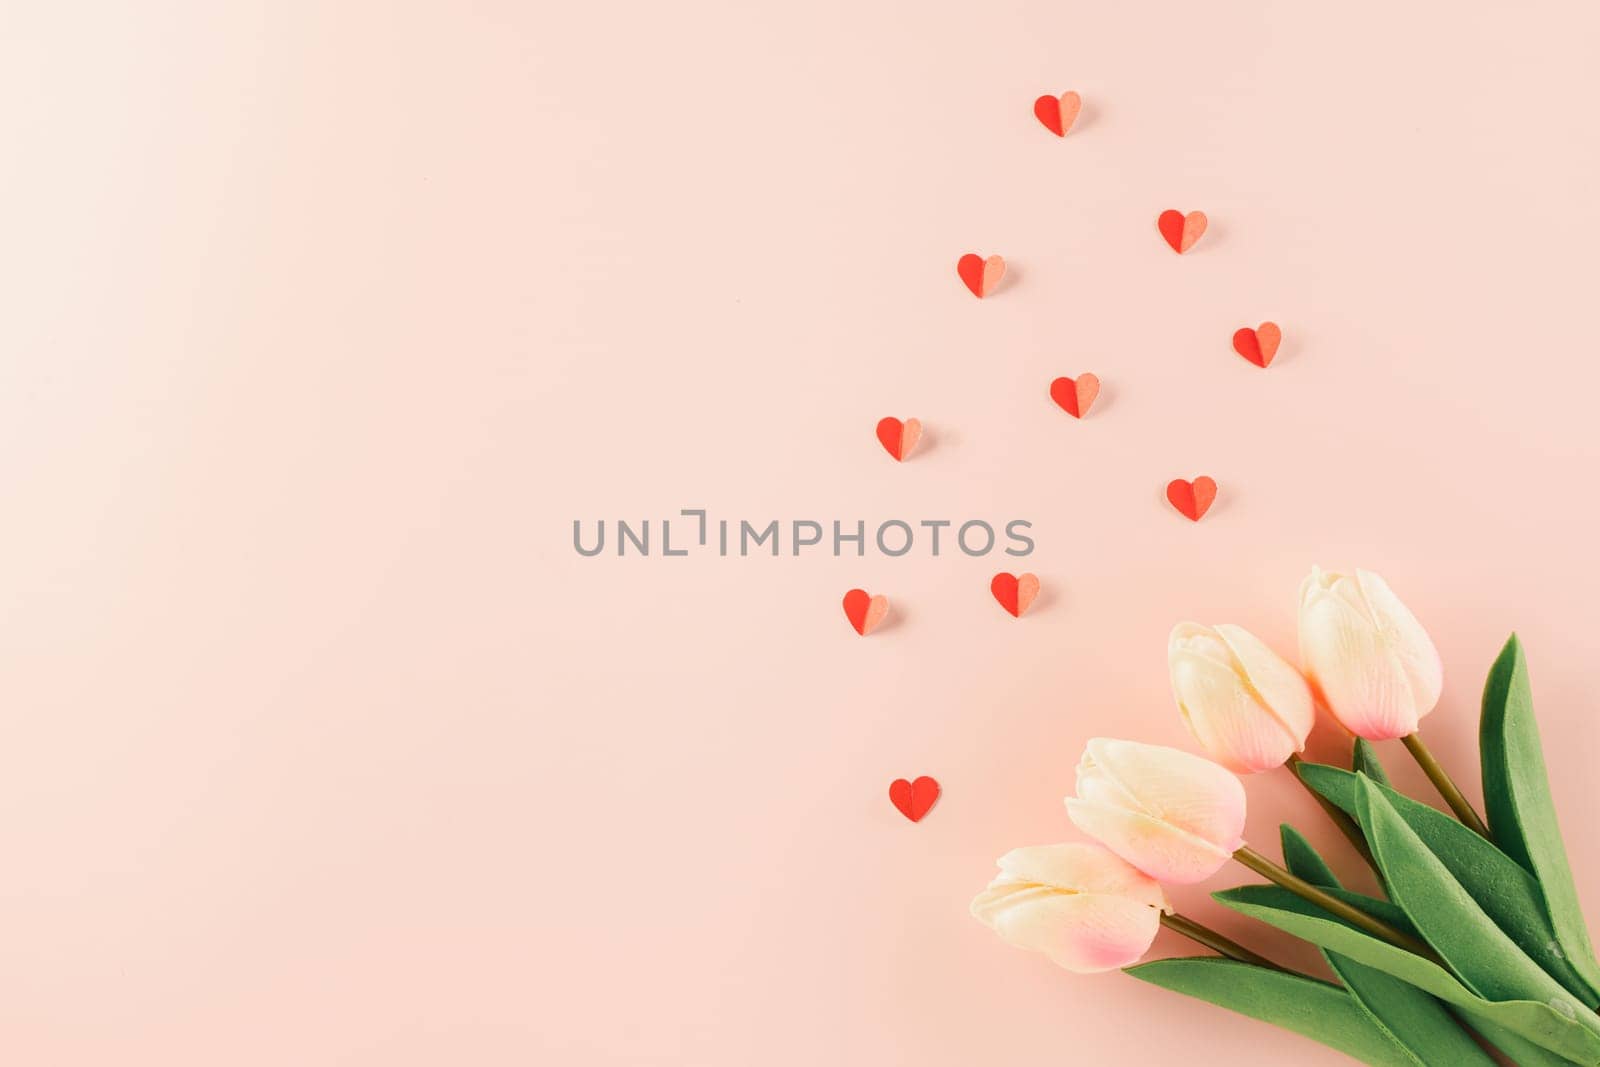 Happy Valentines Day background. Top view flat lay of red paper hearts shape and pink tulips flower on pink background with copy space